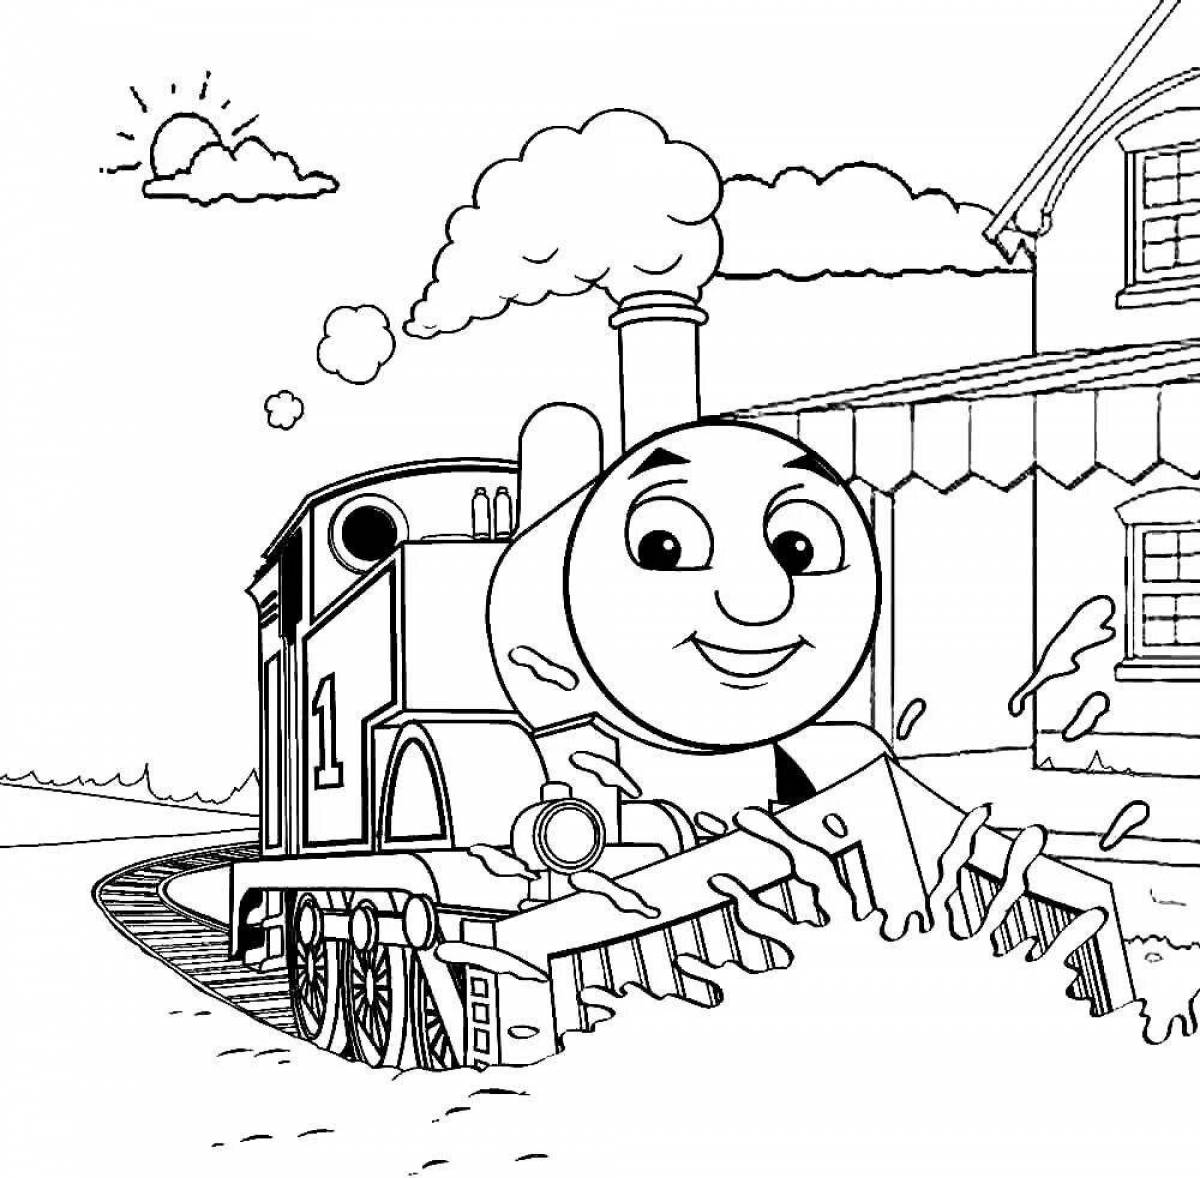 Gorgeous train coloring book for boys